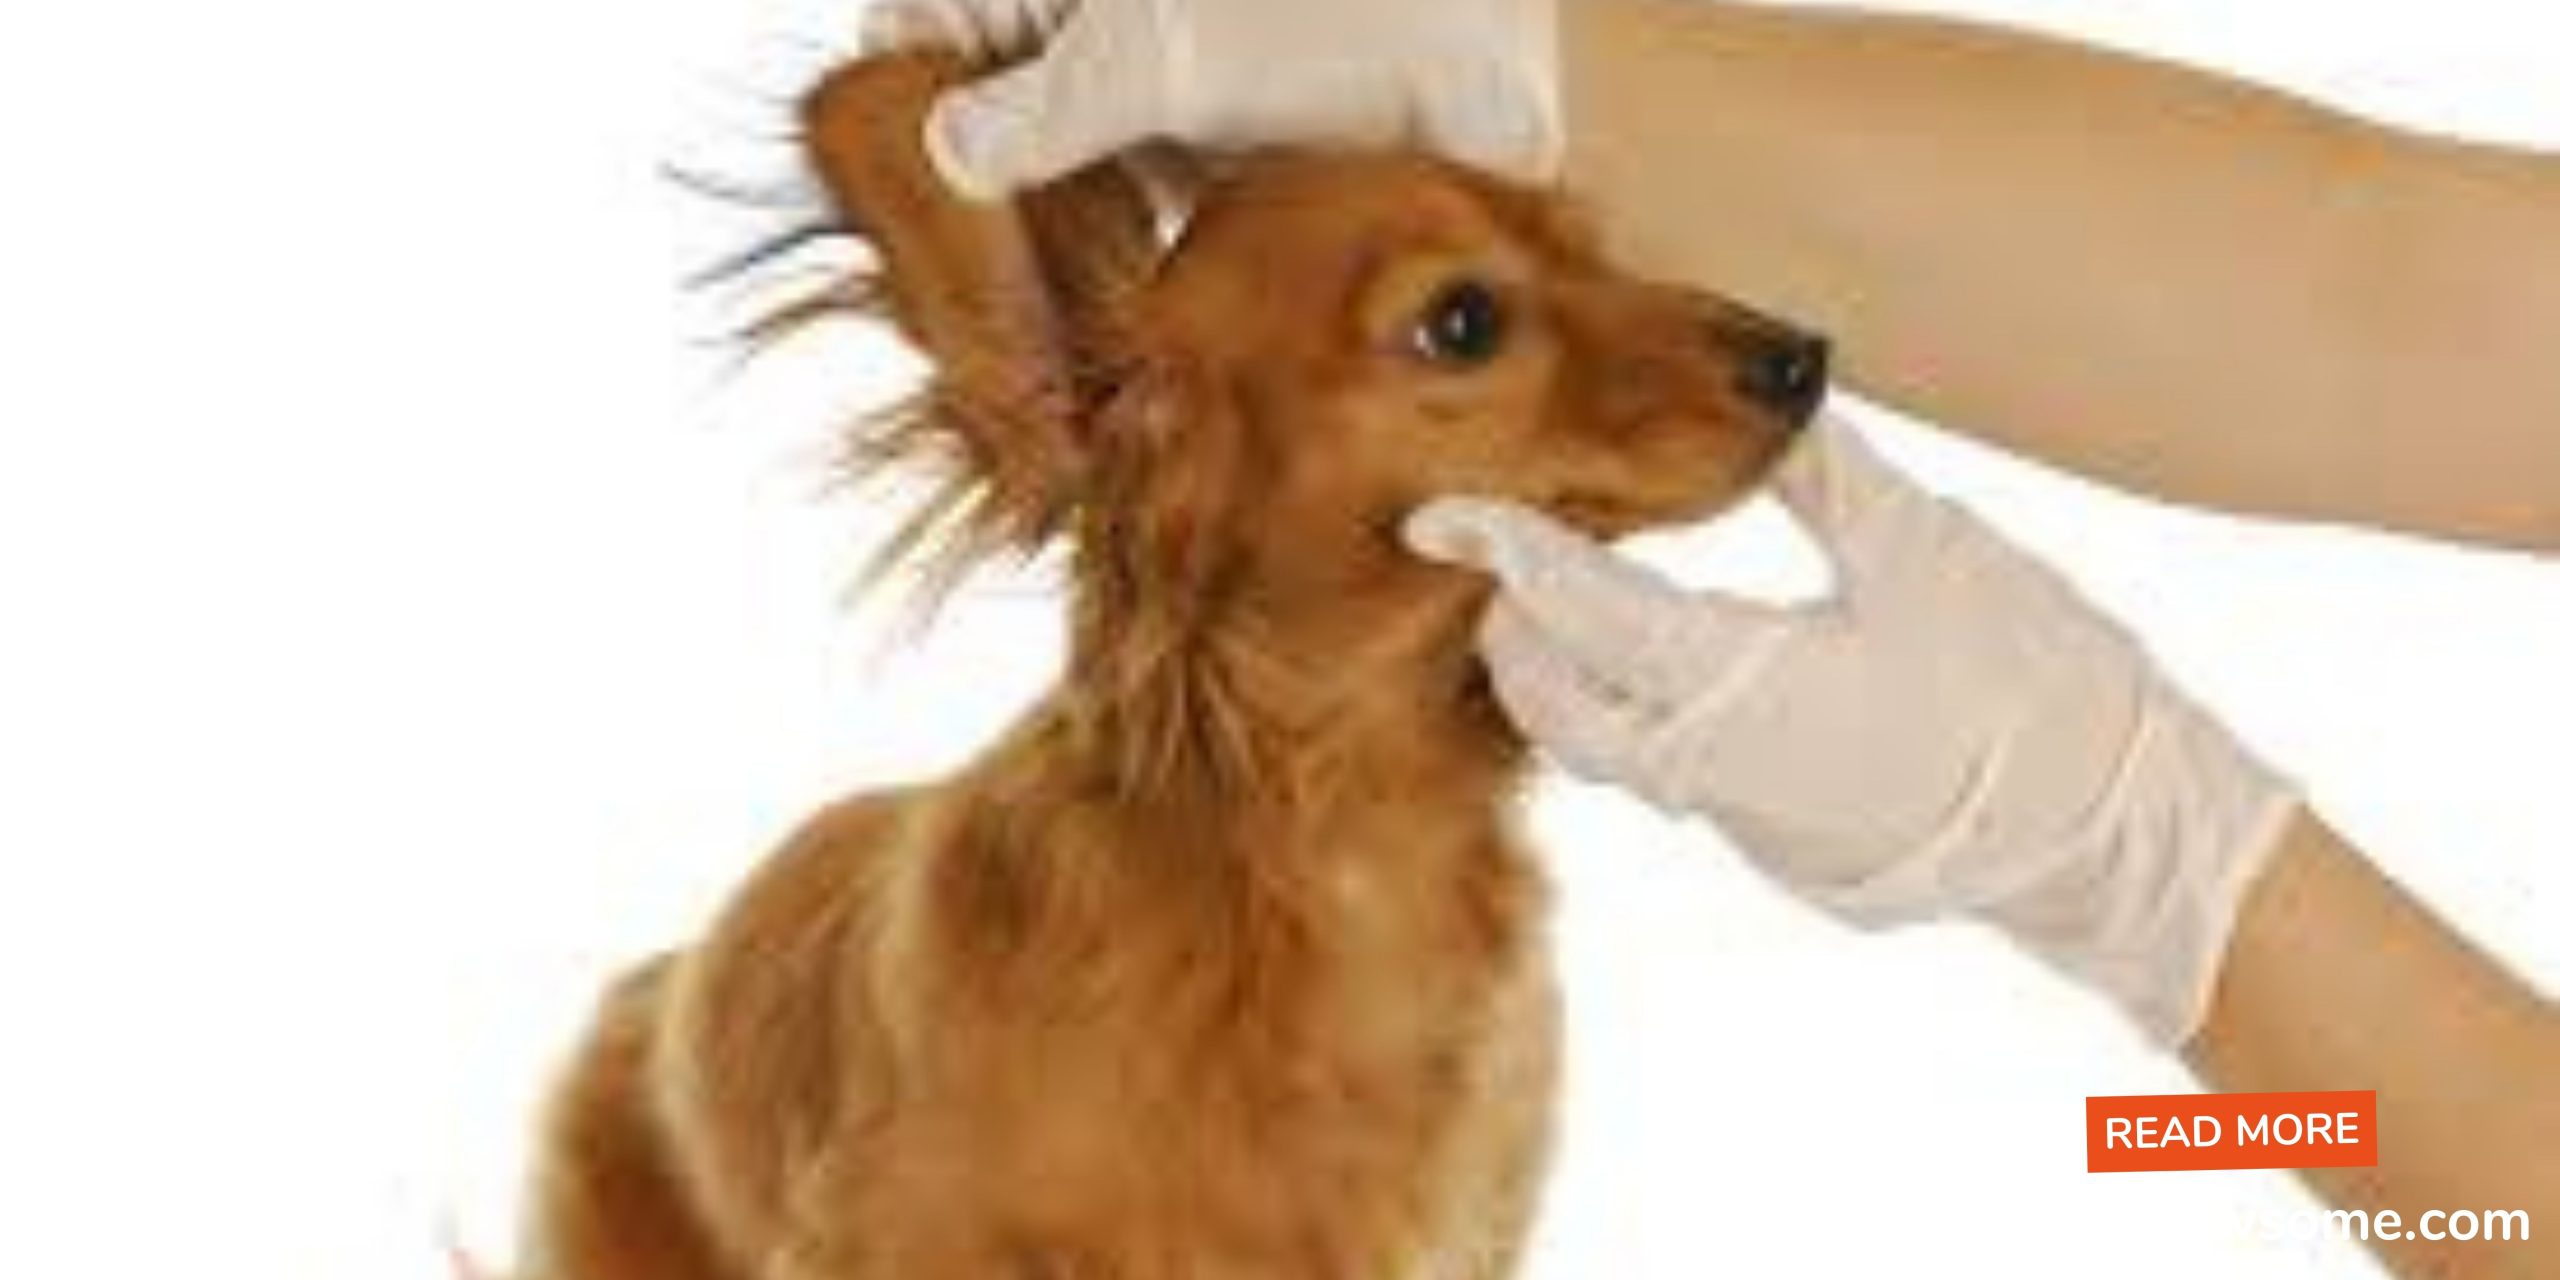 infections contagious in dogs?